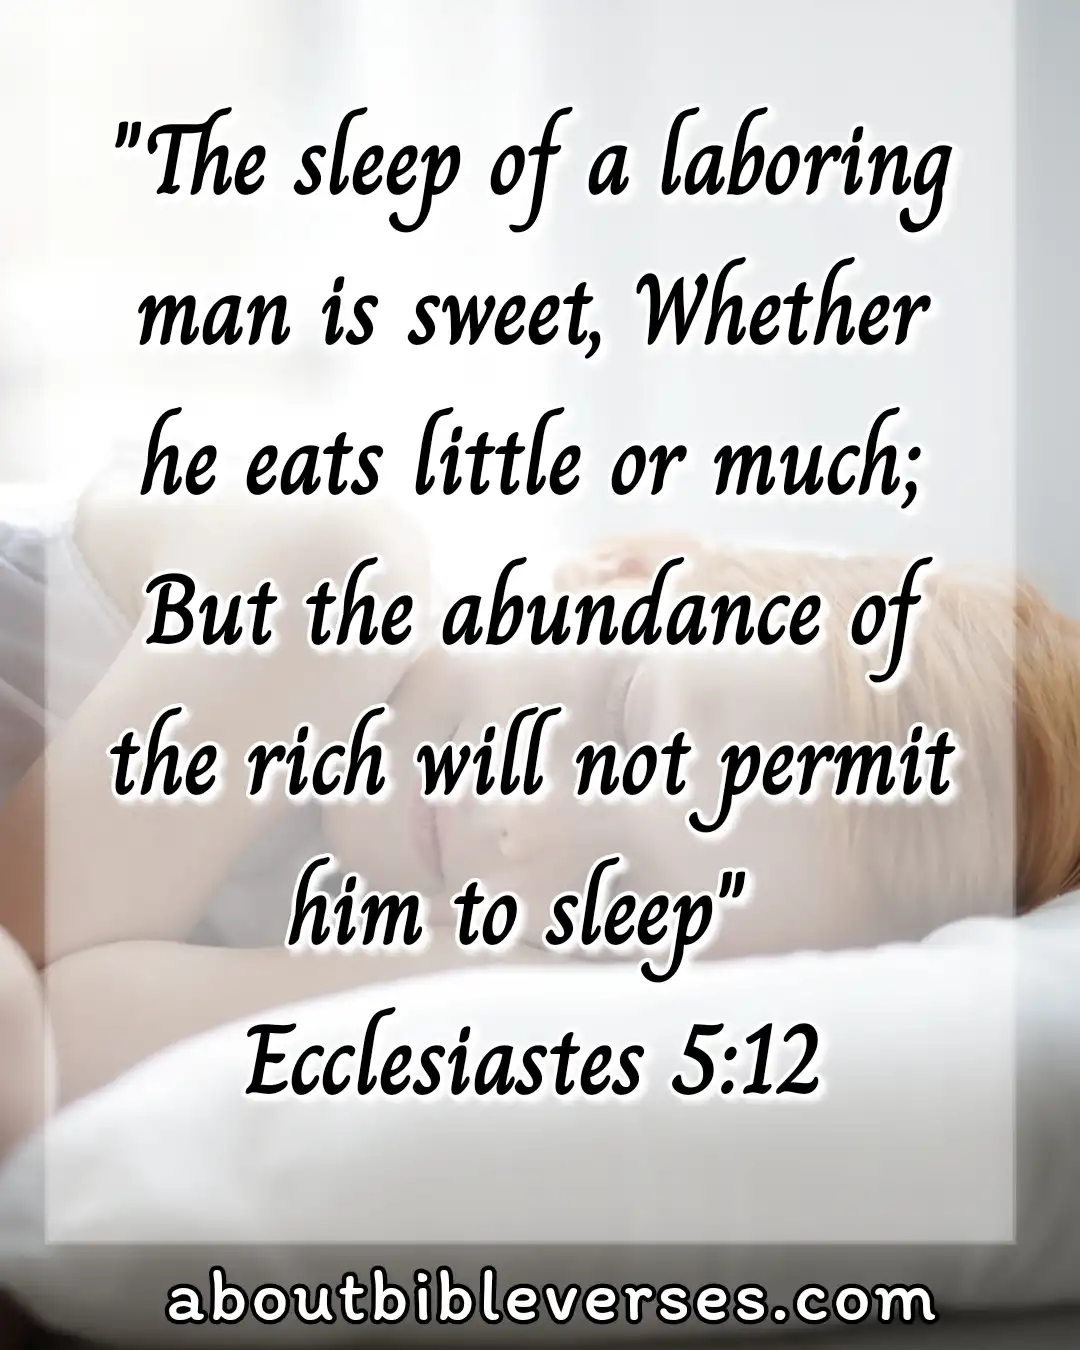 Bible Verses About Sleeping Too Much (Ecclesiastes 5:12)